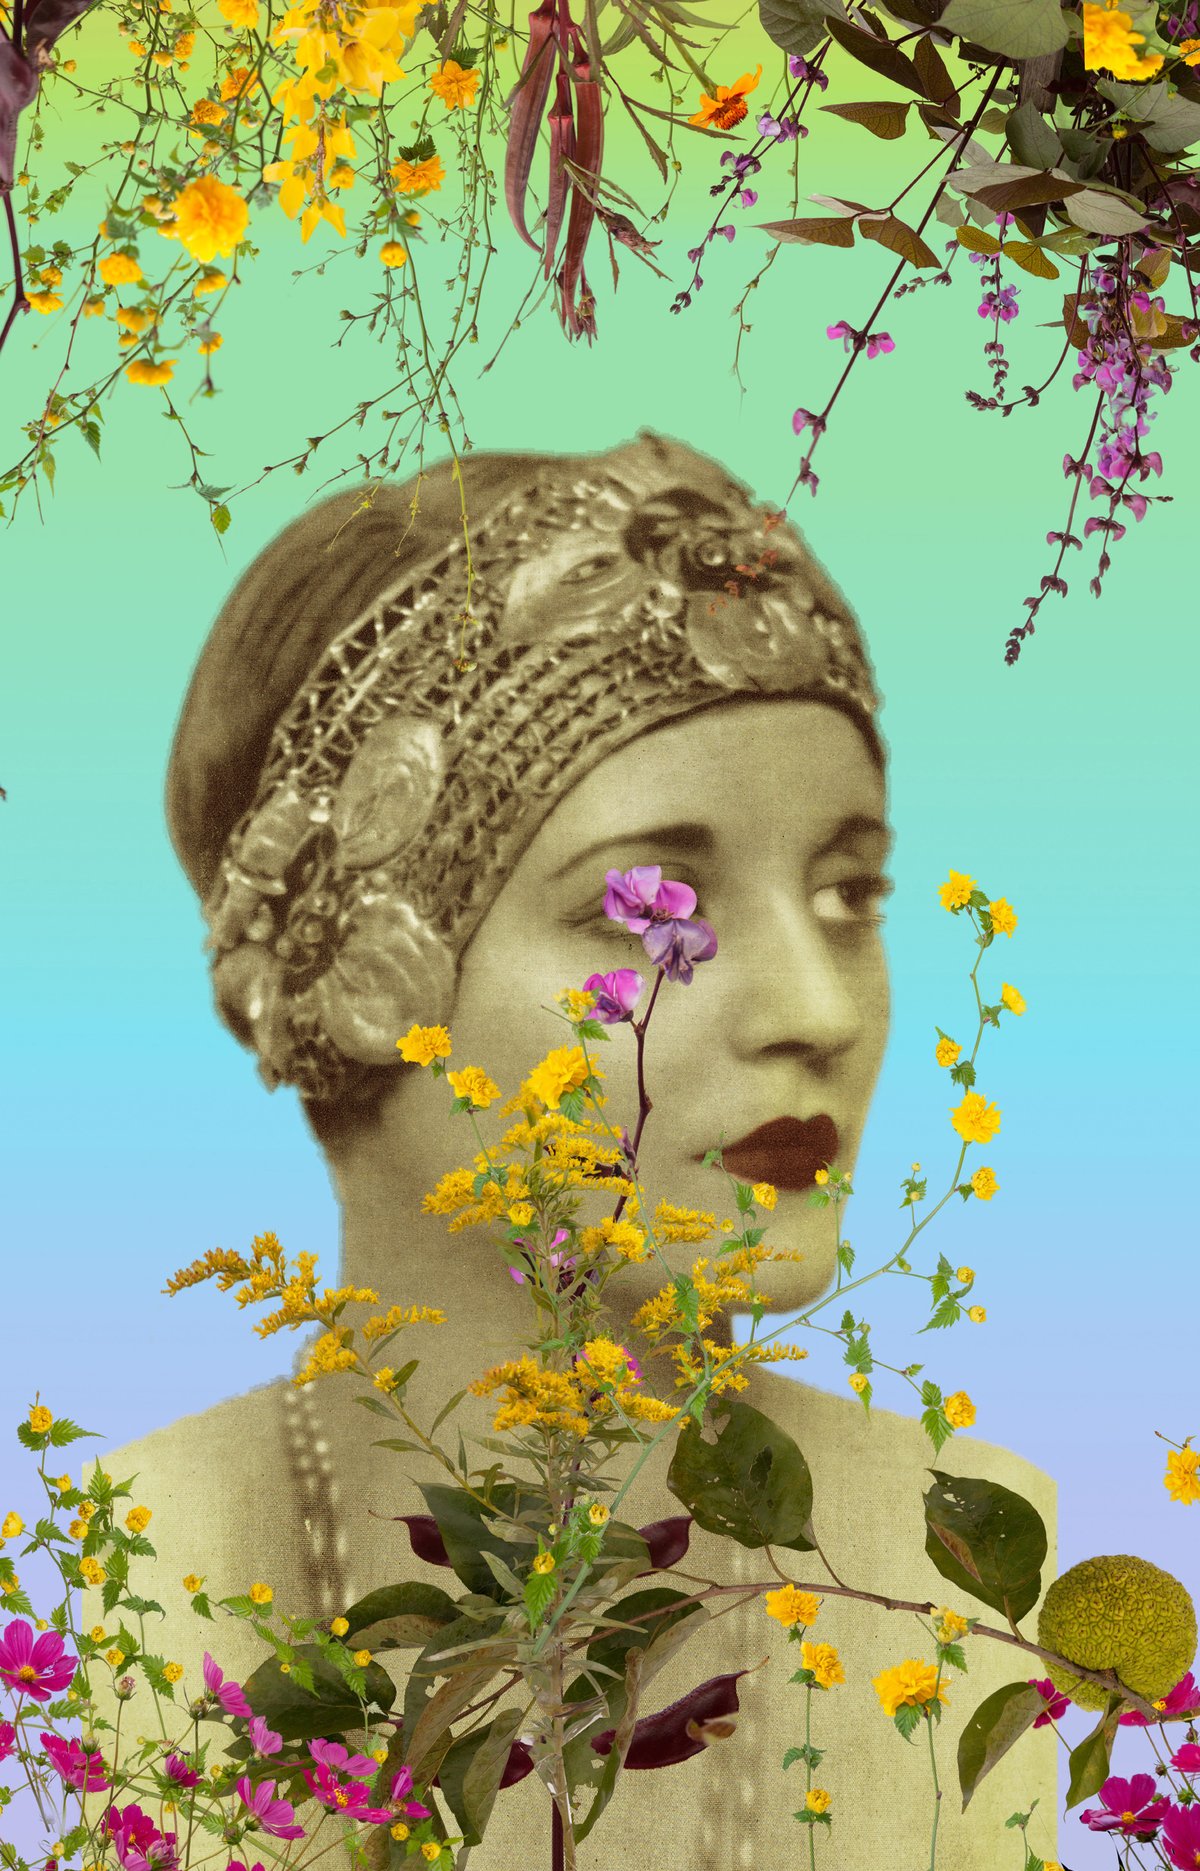 Image of Fallen Fruit - Tallulah Bankhead with Flowers